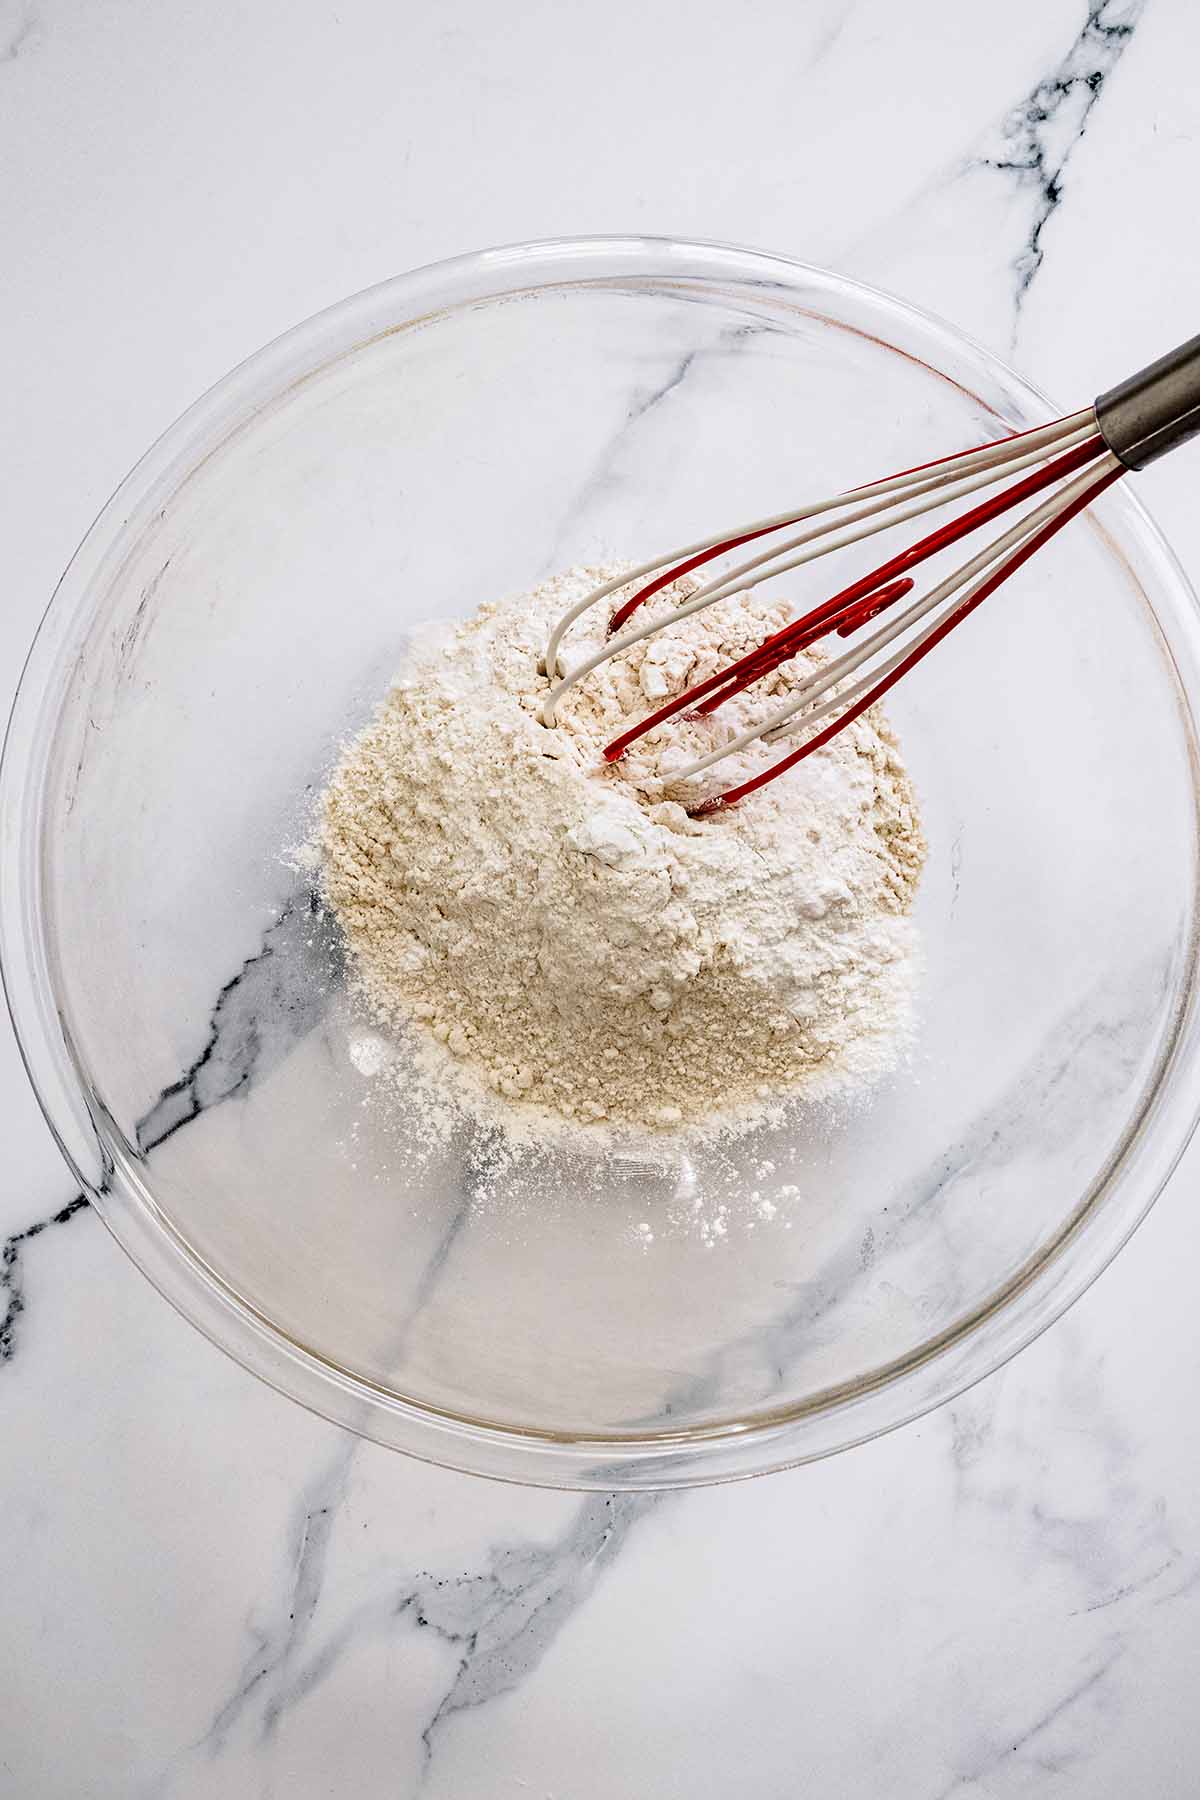 Overhead view of dry ingredients in a glass bowl with a whisk.